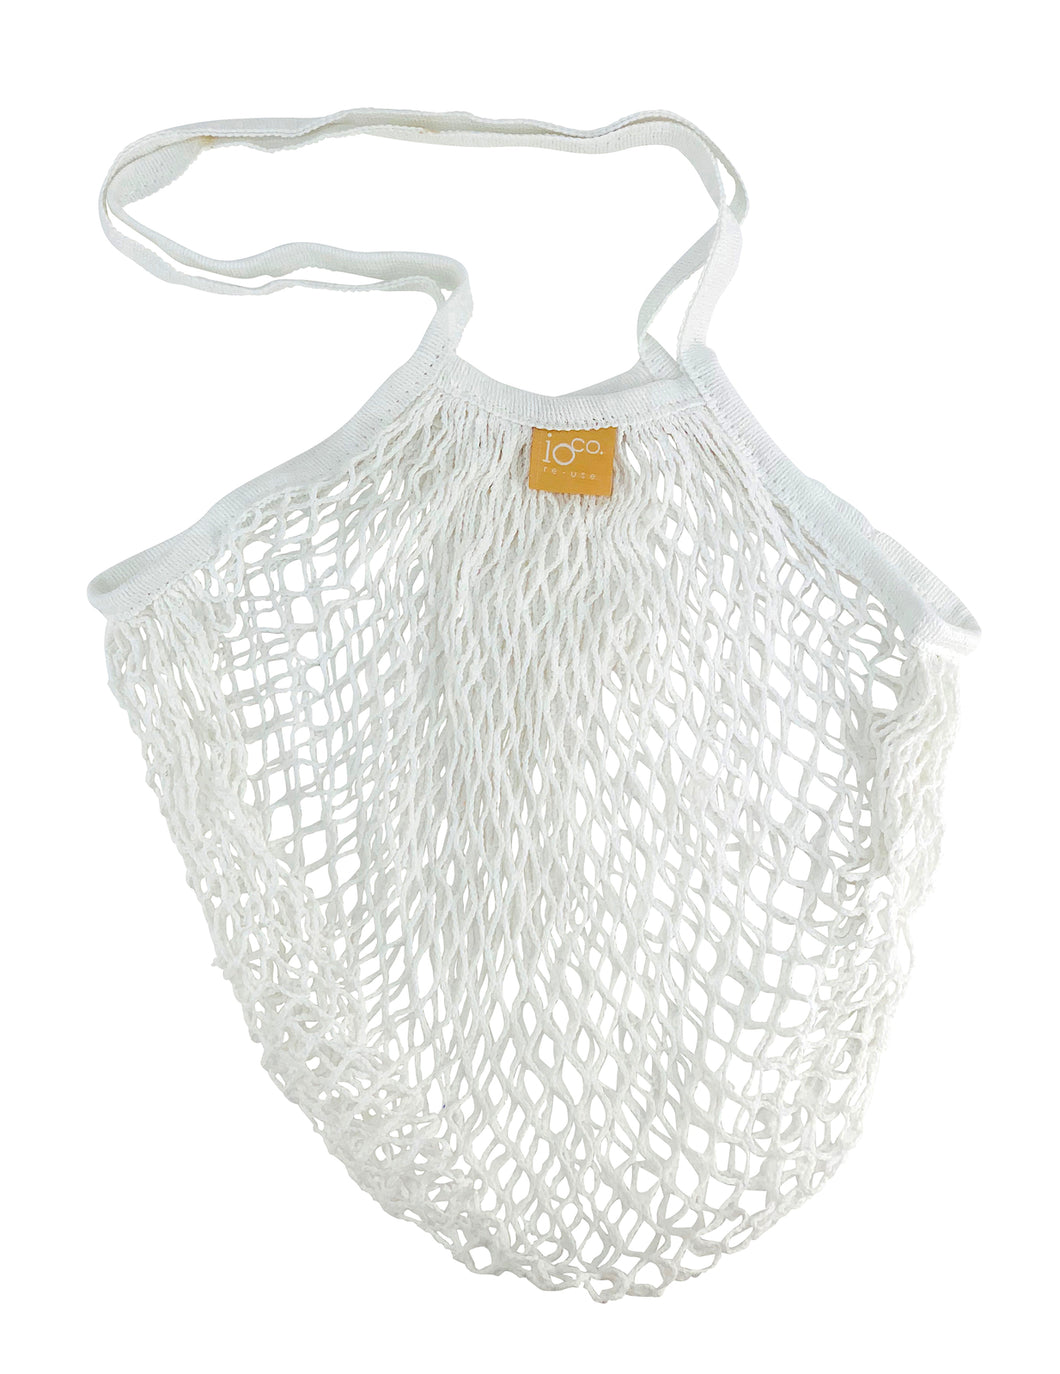 IOco Natural Cotton Mesh Grocery Bags